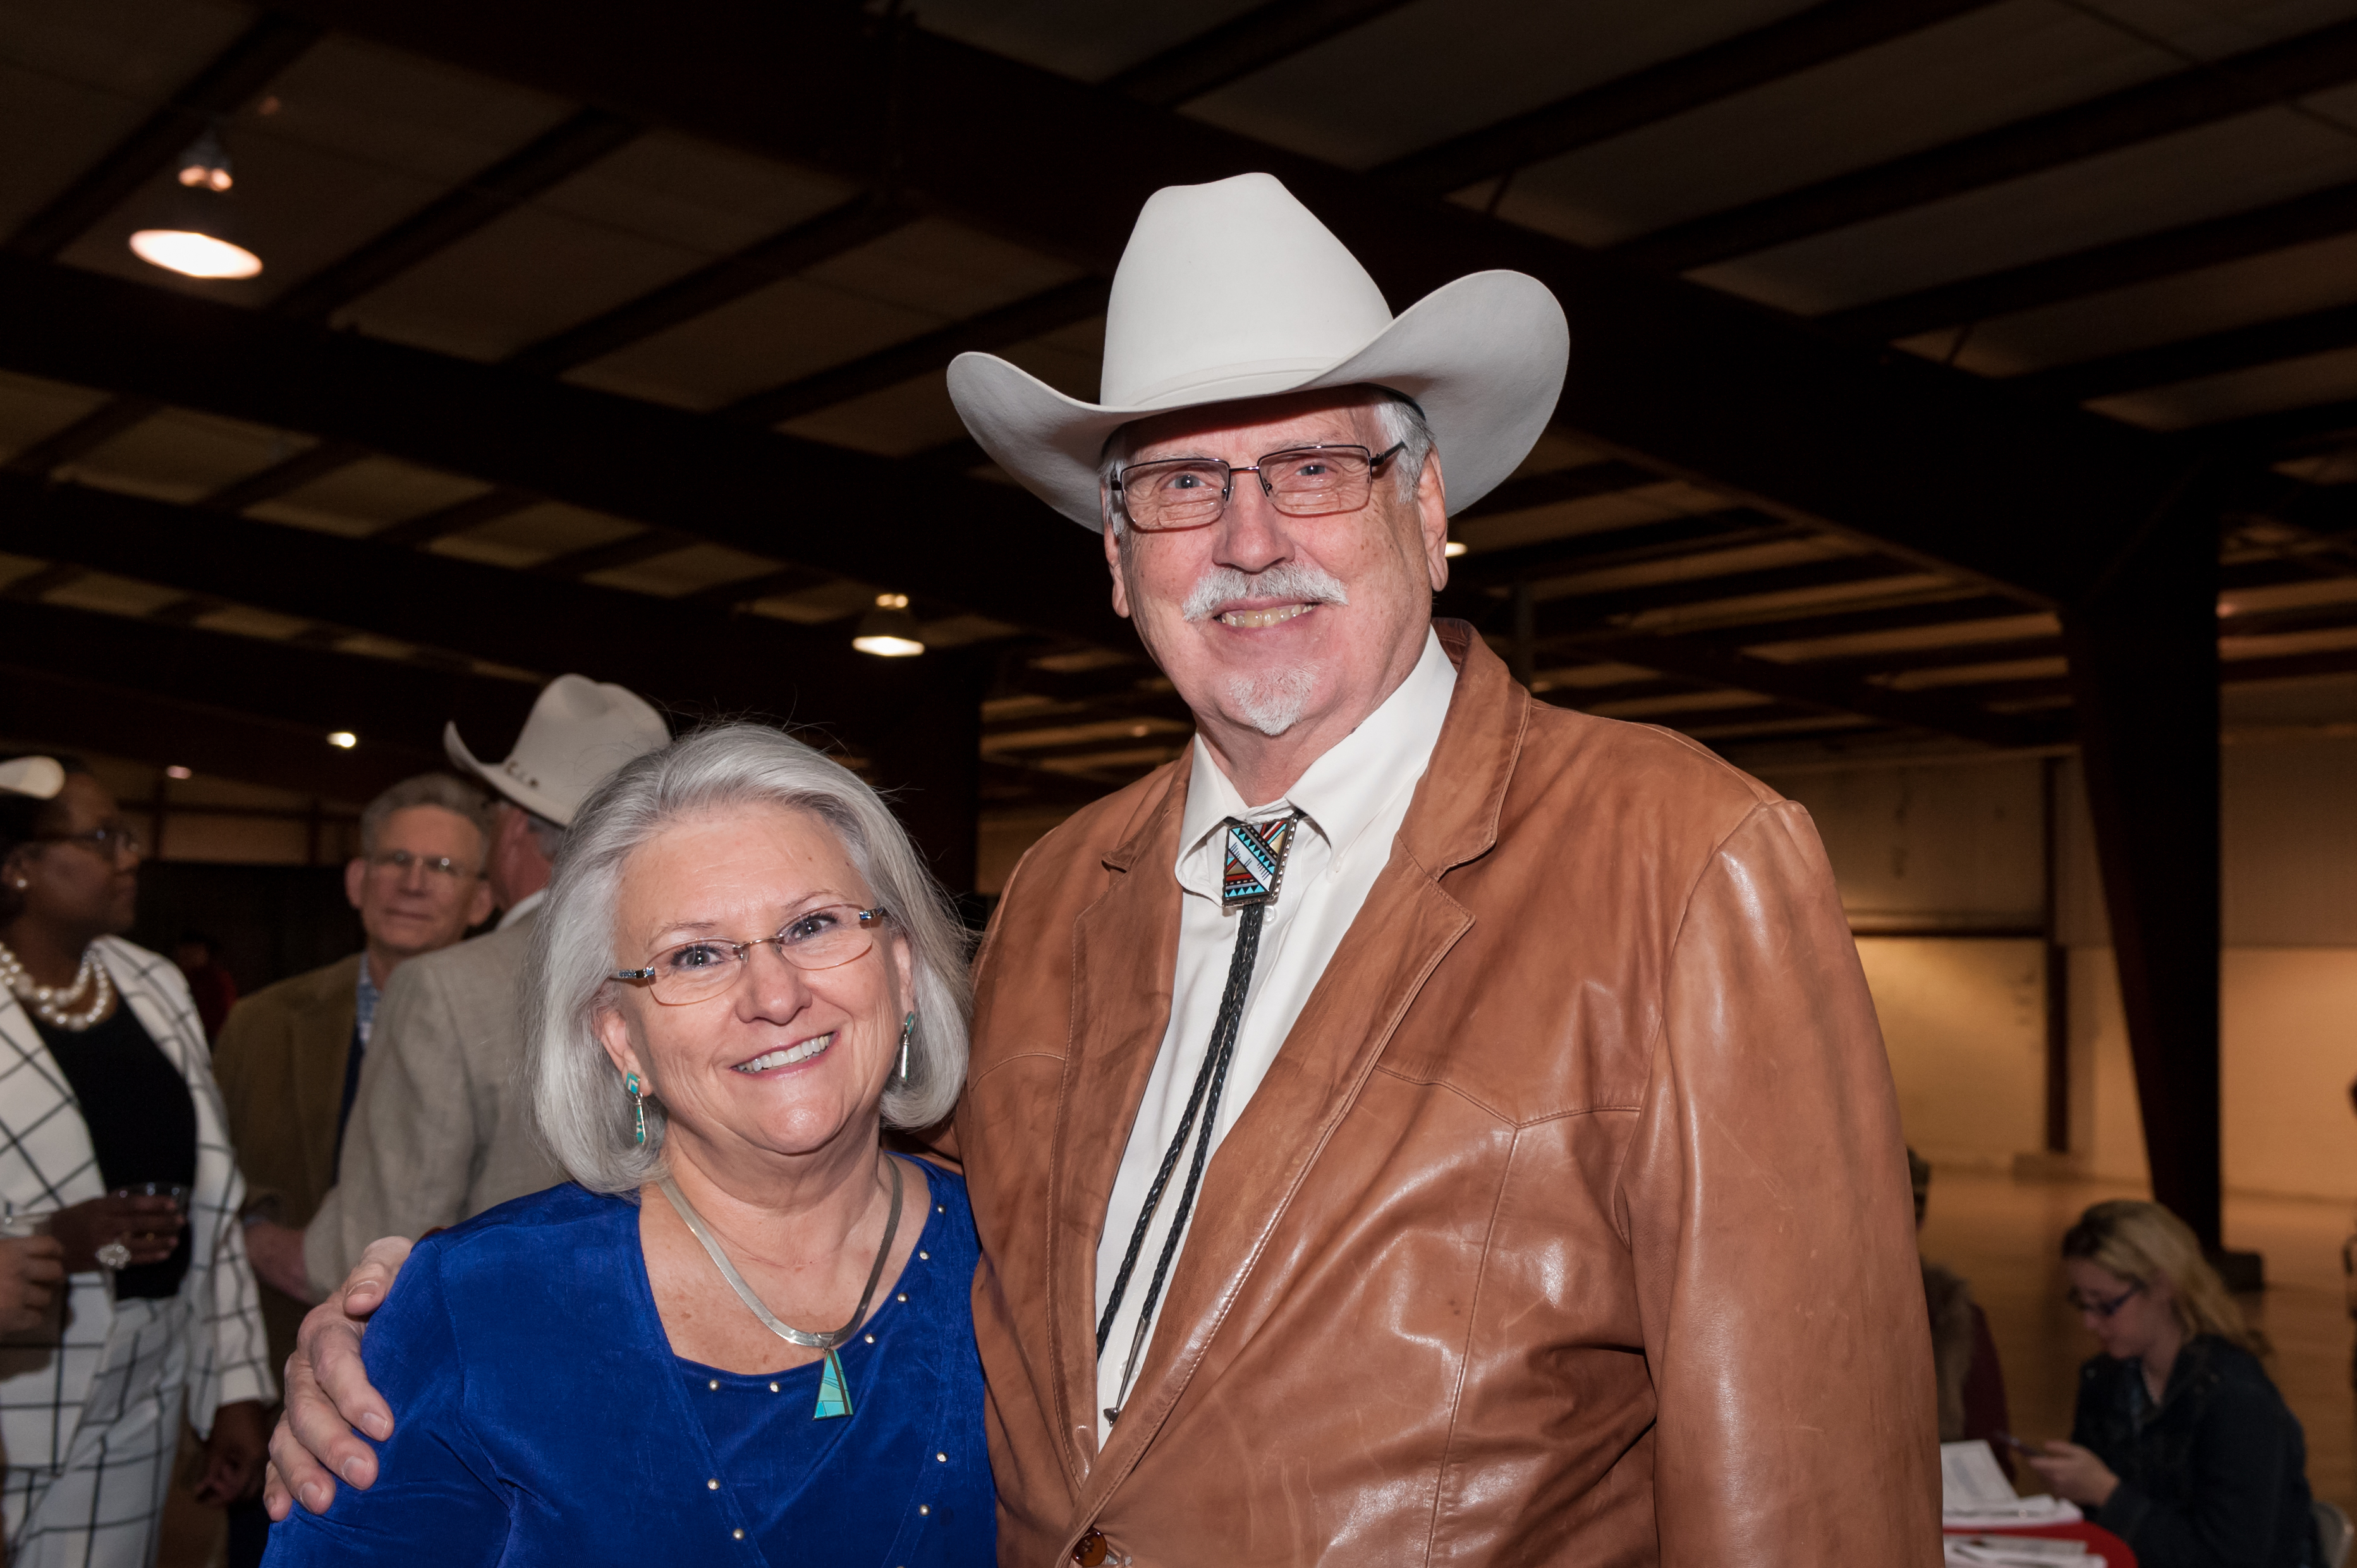 Shaie Williams for AGN Media. Linda and Tom Hicks at the Texas Panhandle Lincoln-Reagan Day Dinner hosted by the local Republican party groups held at The Rex Baxter Building in Amarillo, TX on January 29, 2016